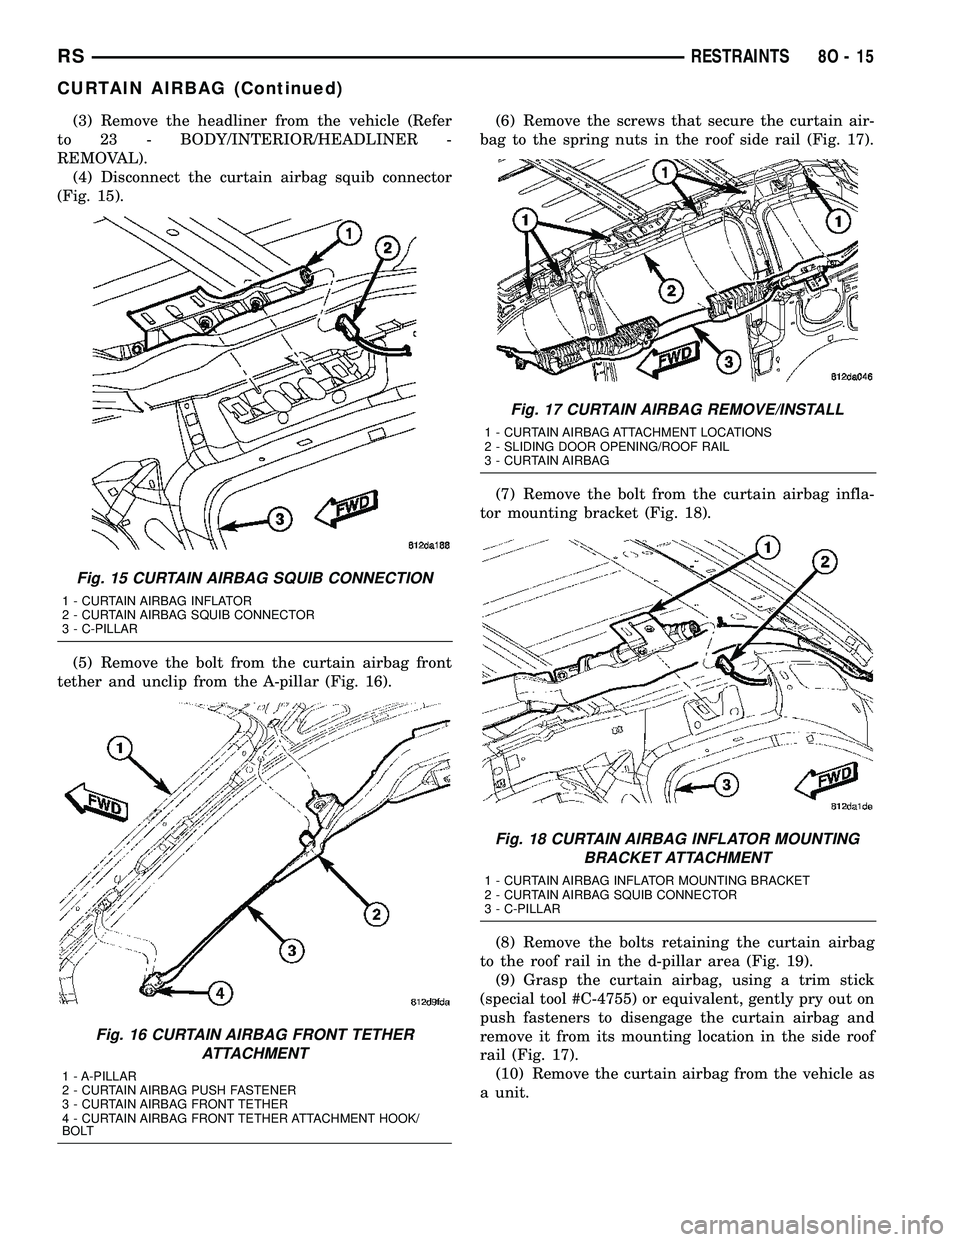 CHRYSLER VOYAGER 2005  Service Manual (3) Remove the headliner from the vehicle (Refer
to 23 - BODY/INTERIOR/HEADLINER -
REMOVAL).
(4) Disconnect the curtain airbag squib connector
(Fig. 15).
(5) Remove the bolt from the curtain airbag fr